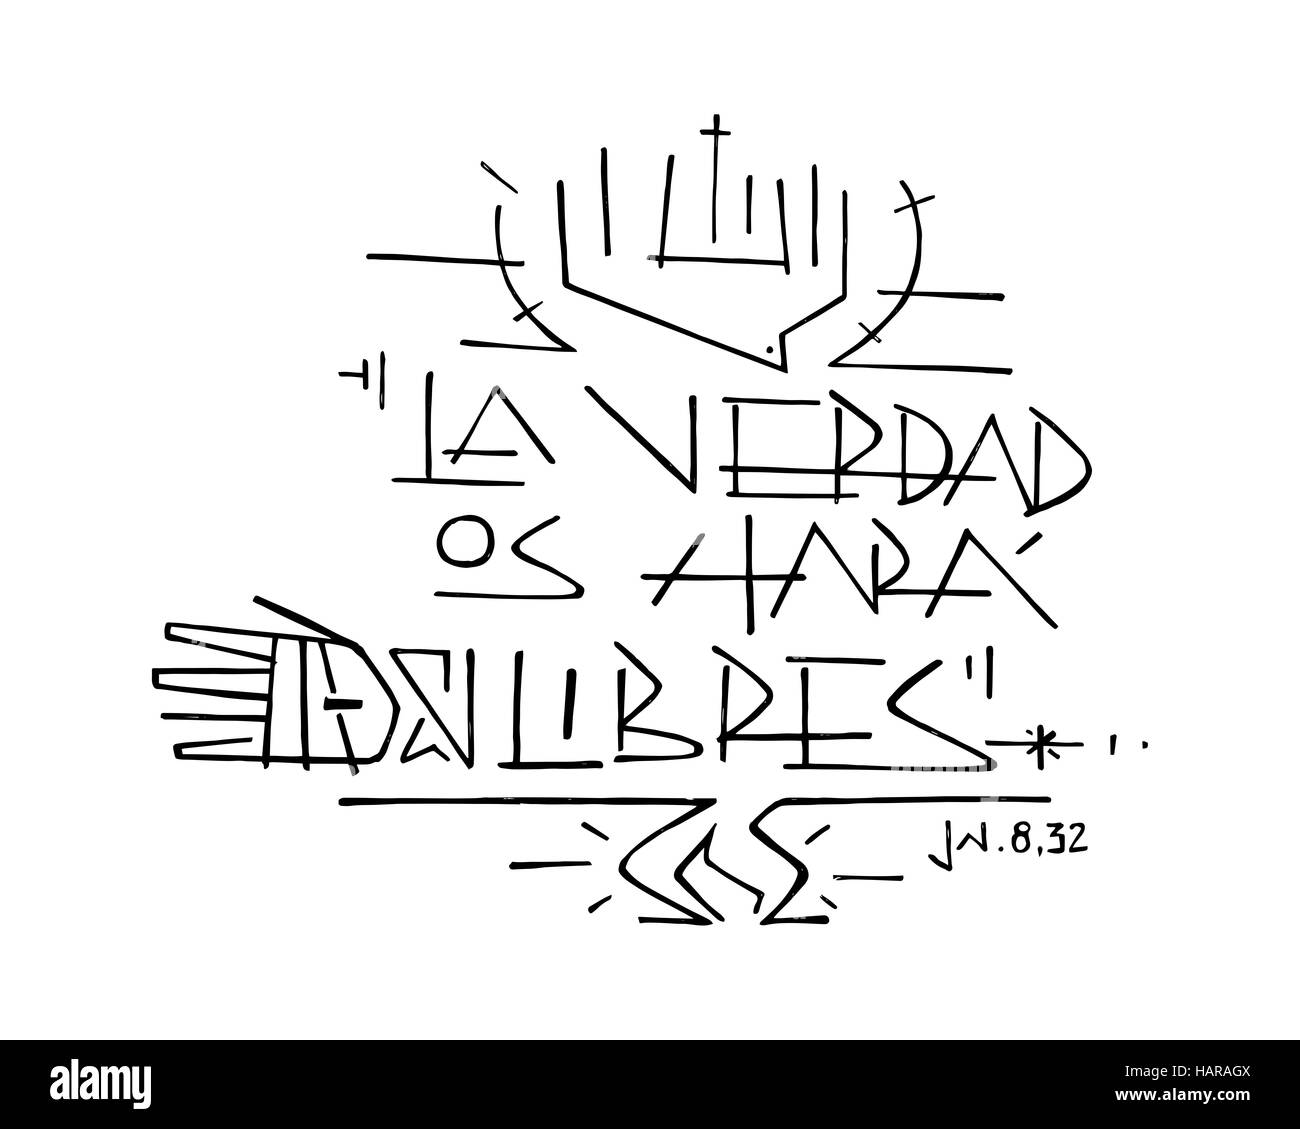 Hand drawn vector illustration or drawing of Jesus Christ phrase in spanish: La Verdad os hara libres, wich means: Truth will set you free Stock Photo